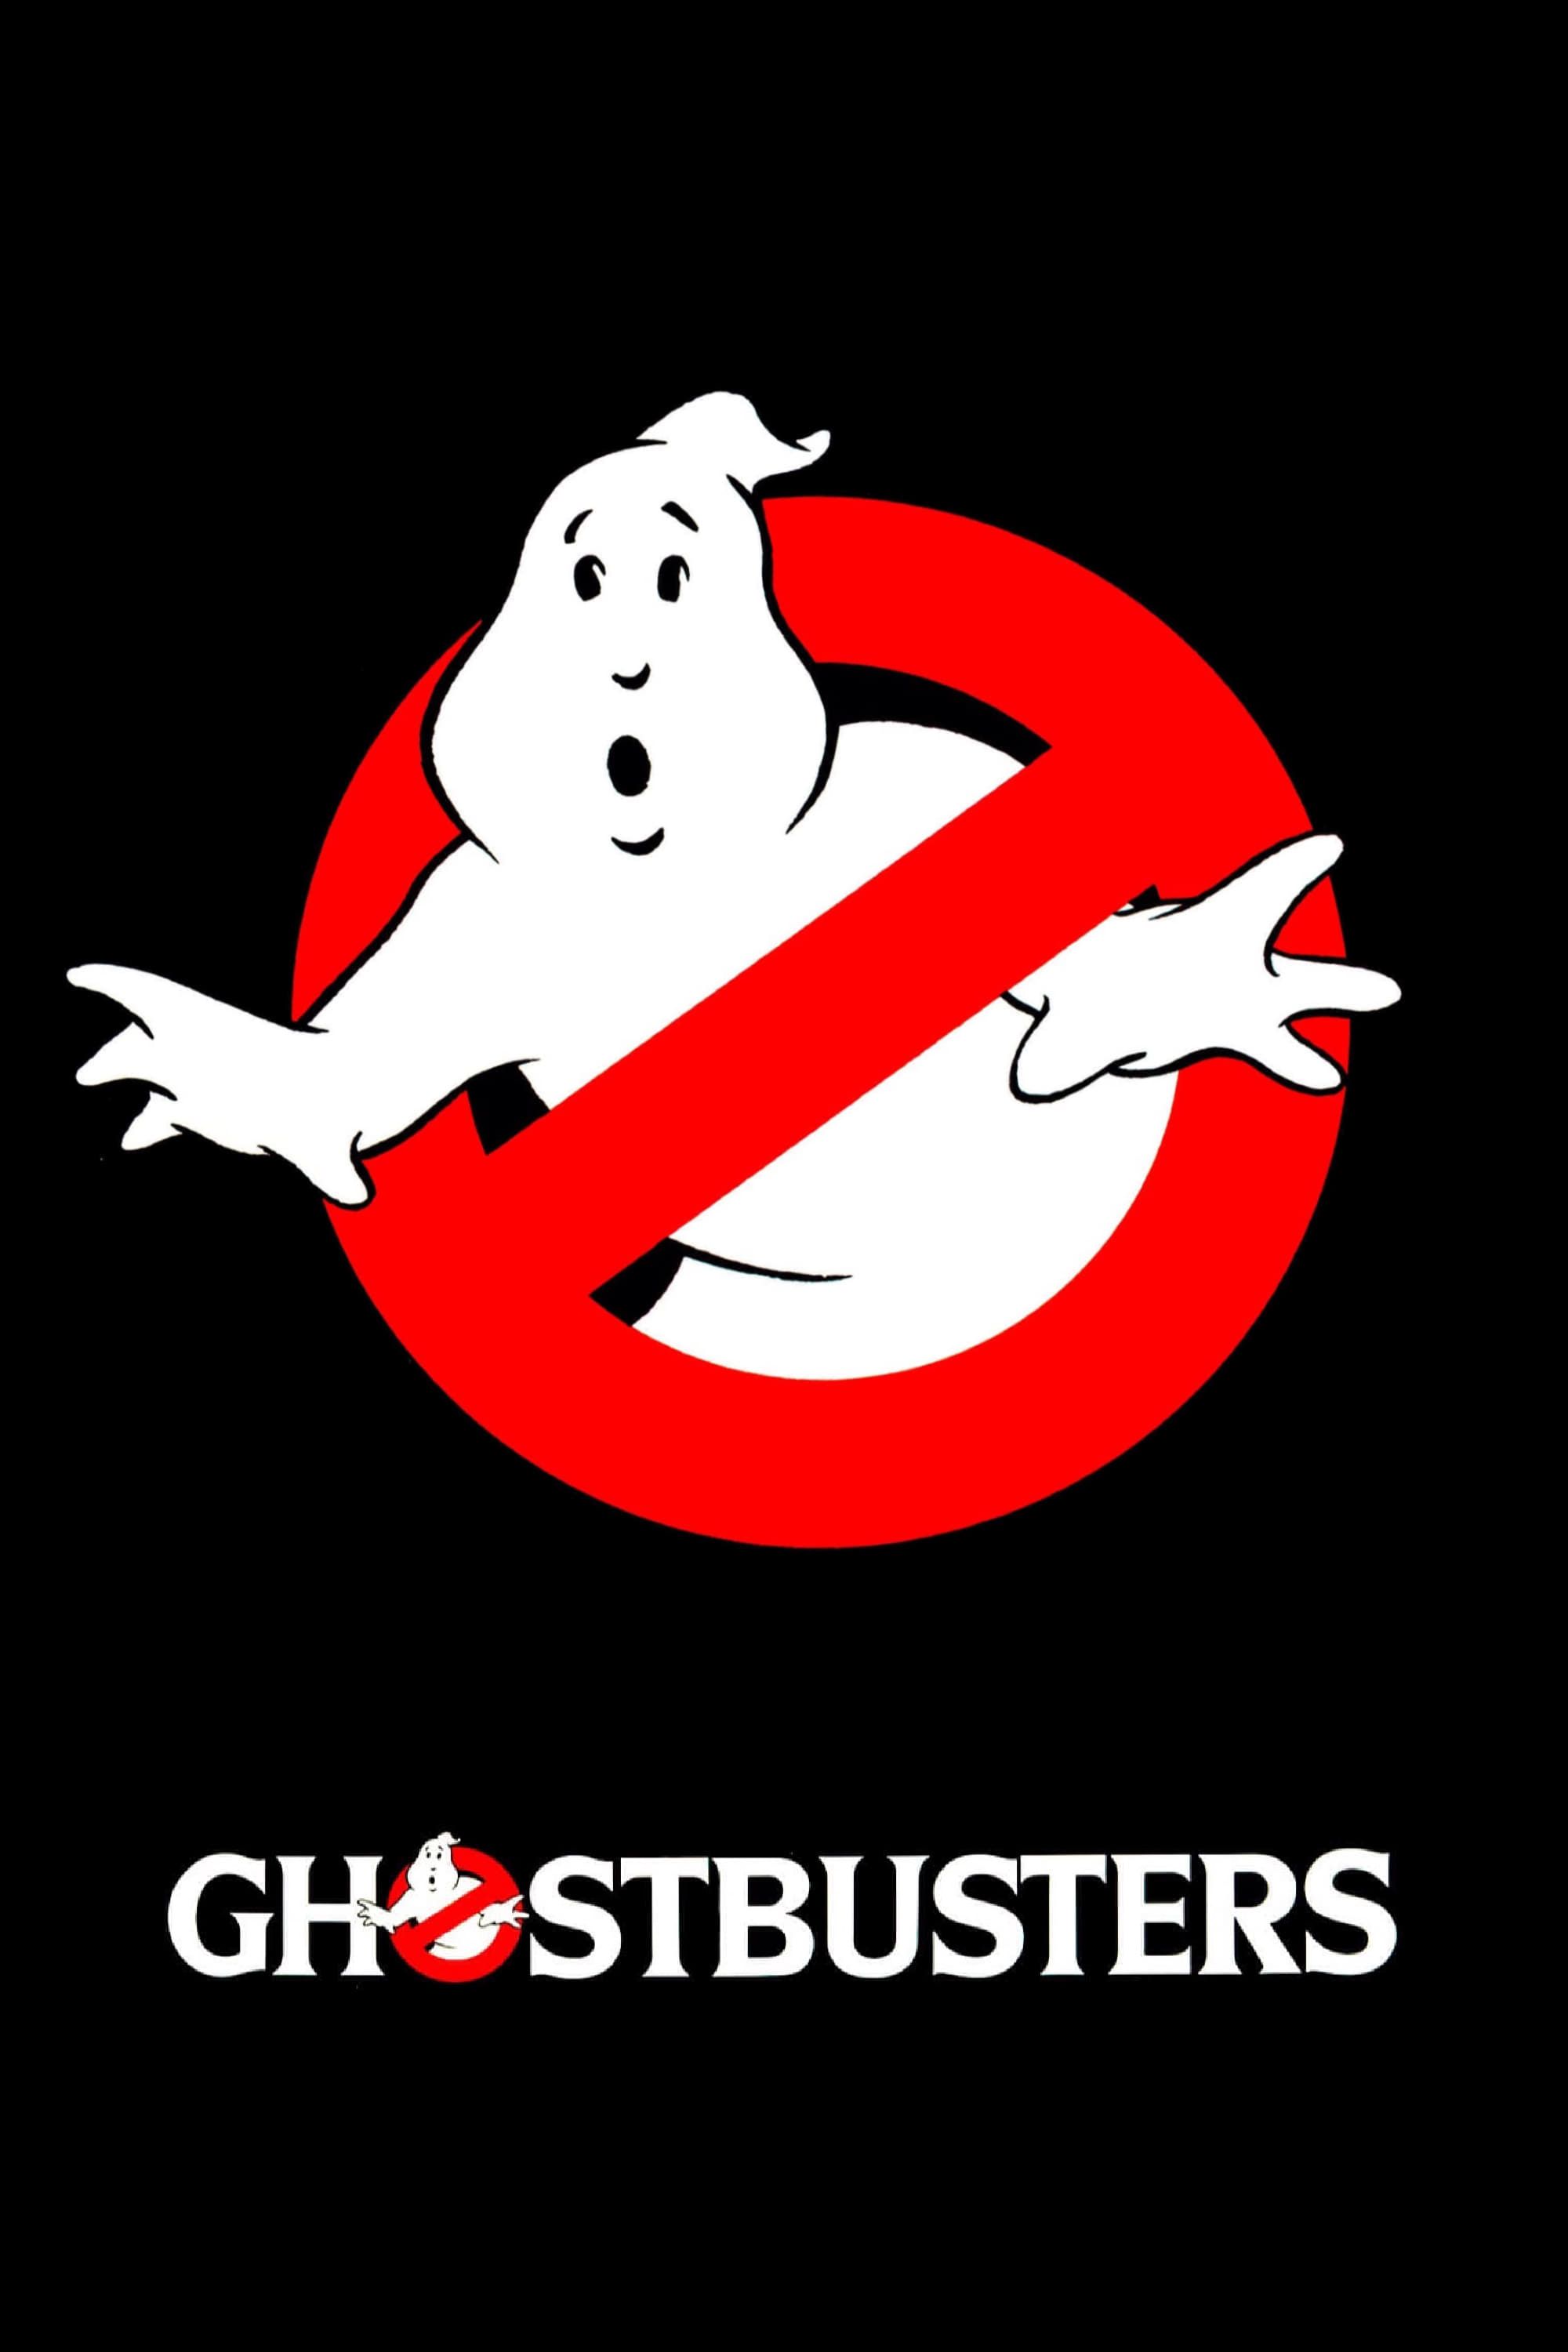 Ghostbusters Franchise Poster